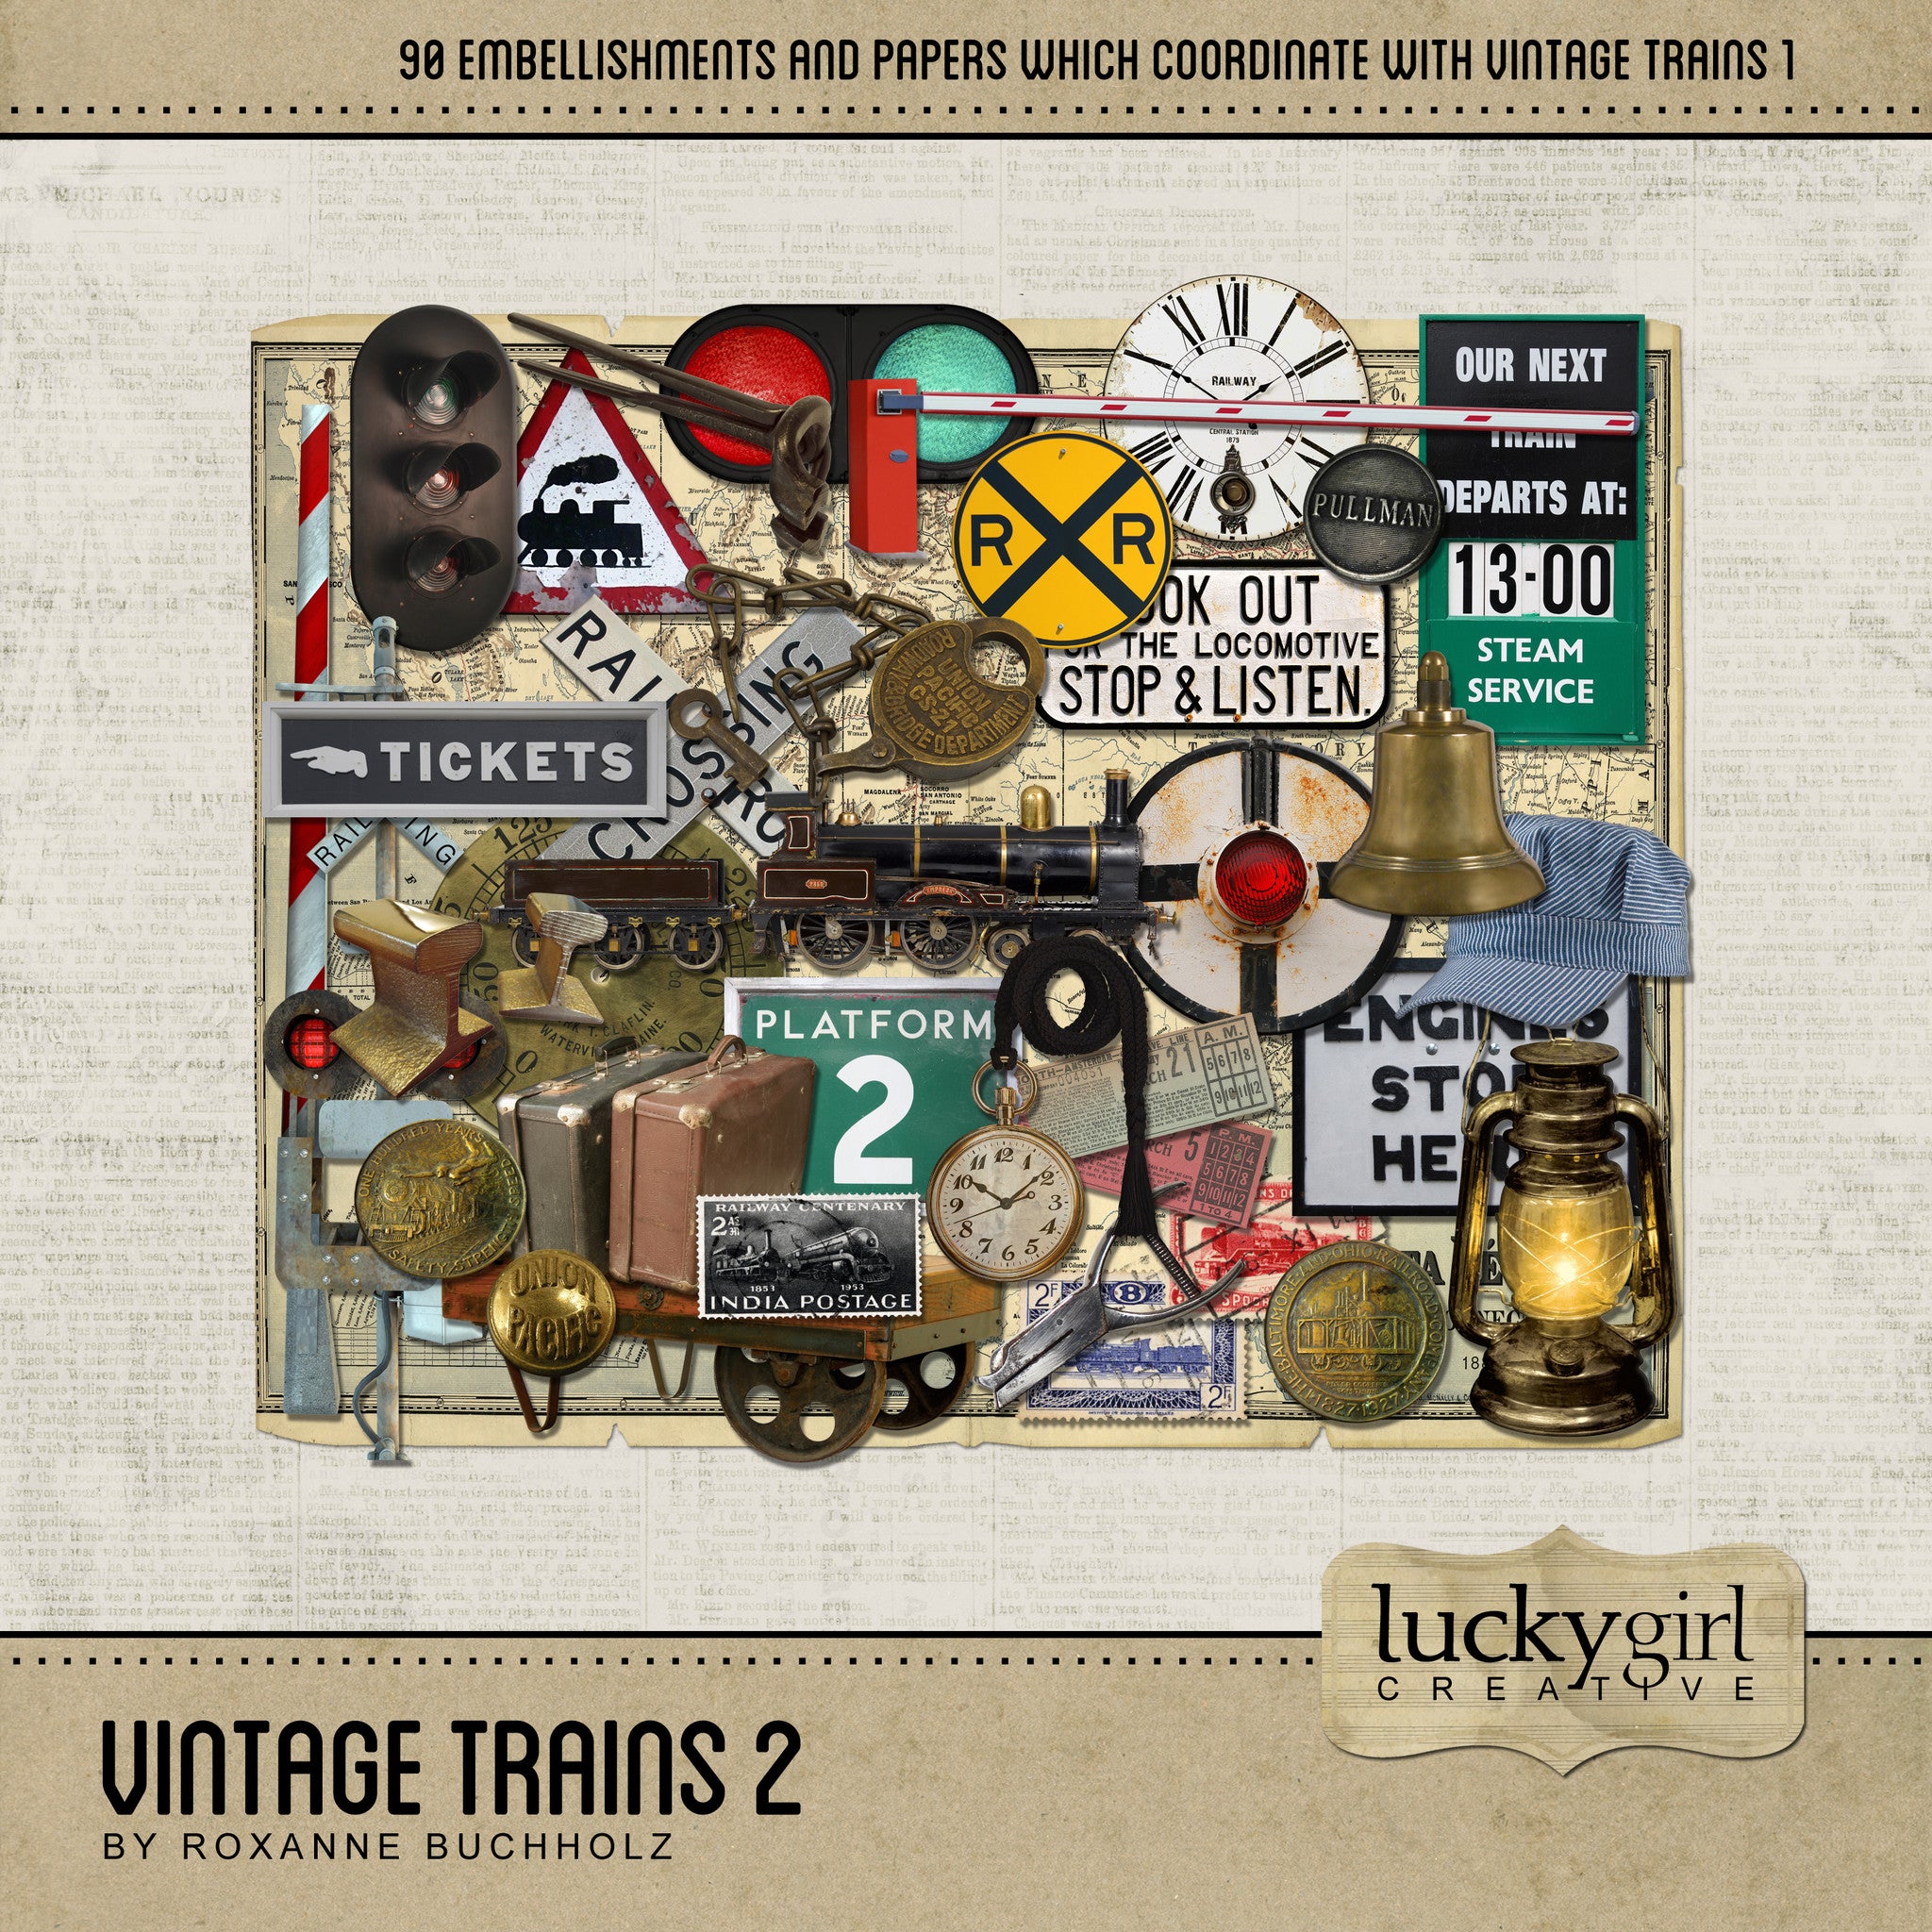 All Aboard! Vintage Trains 2 Digital Scrapbook Kit was designed to offer you an extensive railroad themed digital art collection for all the avid train enthusiasts out there. This kit is filled with antique railroad signs, buttons, tickets, ticket punch, vintage railroad maps, luggage, luggage cart, lights, model trains, platform signs, railroad tracks, postage stamps, steam engine parts, bell, gauge, and so much more!